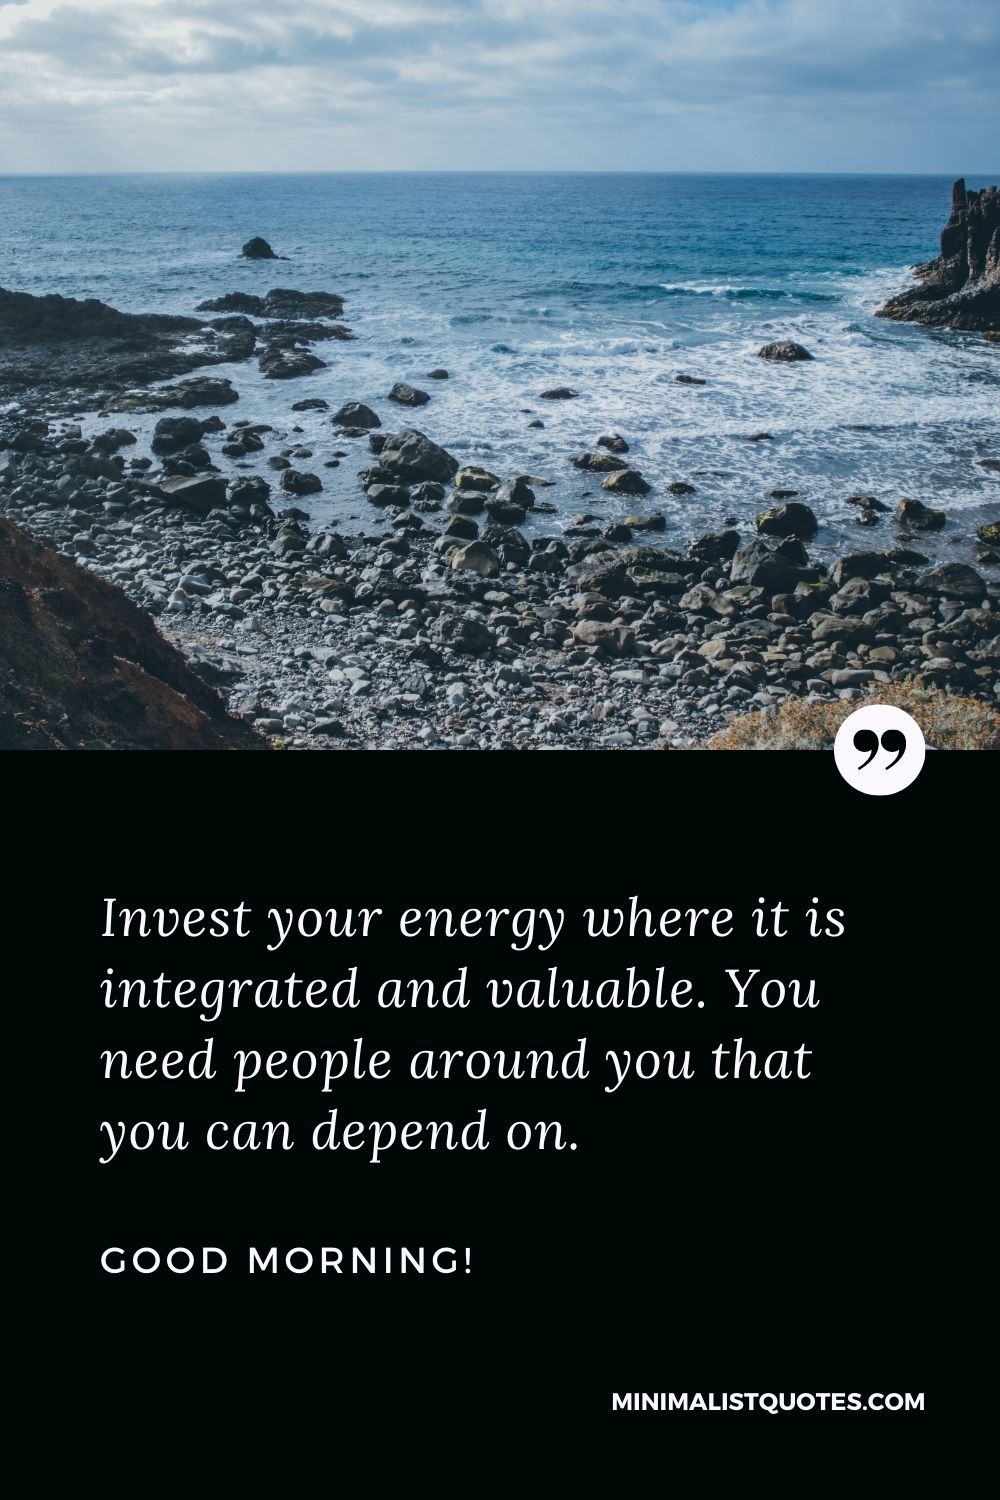 Best good morning quotes for friends: Invest your energy where it is integrated and valuable. You need people around you that you can depend on. Good Morning!